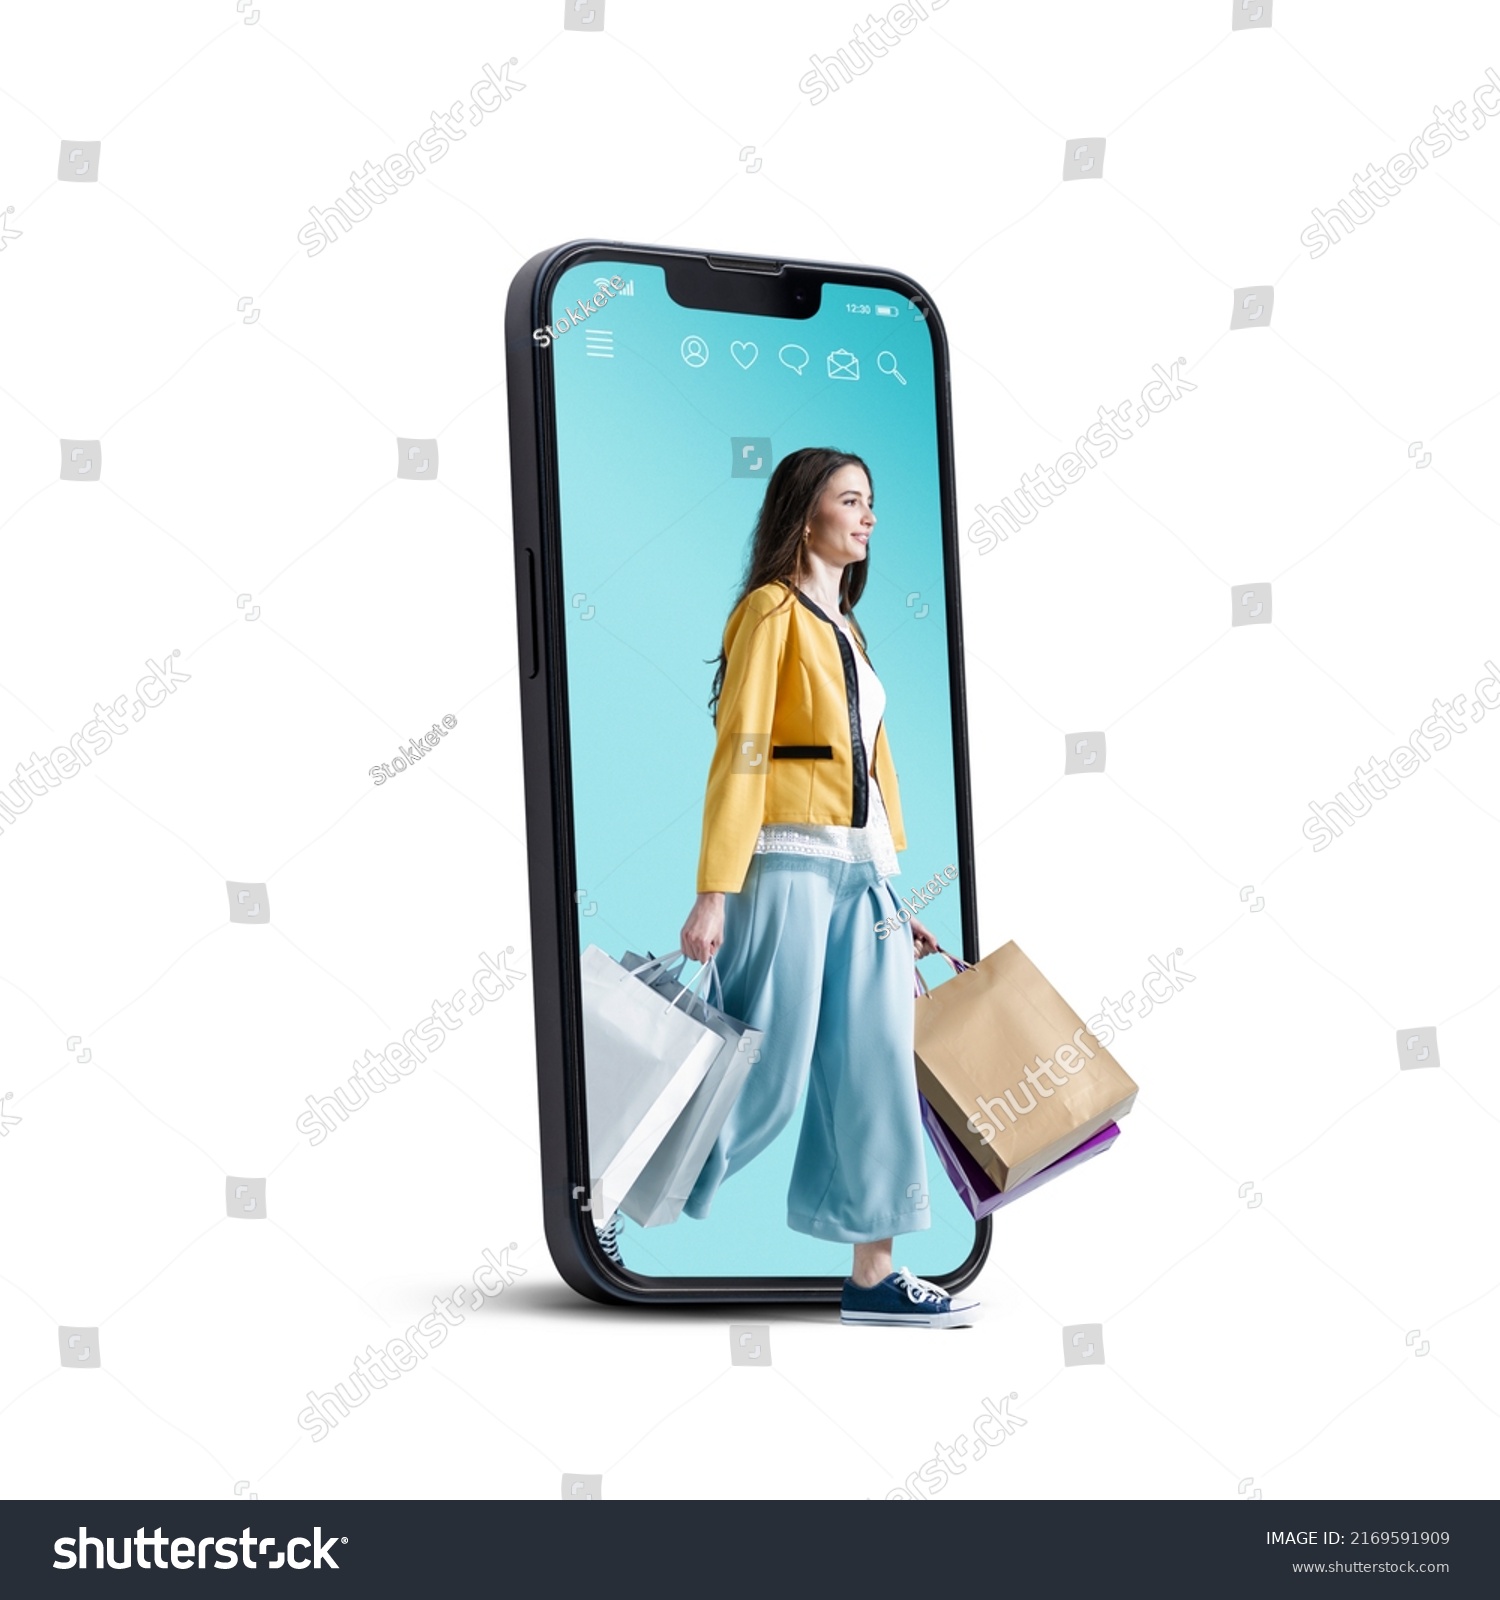 Happy woman in a smartphone walking and holding many shopping bags, online shopping concept, isolated on white background #2169591909